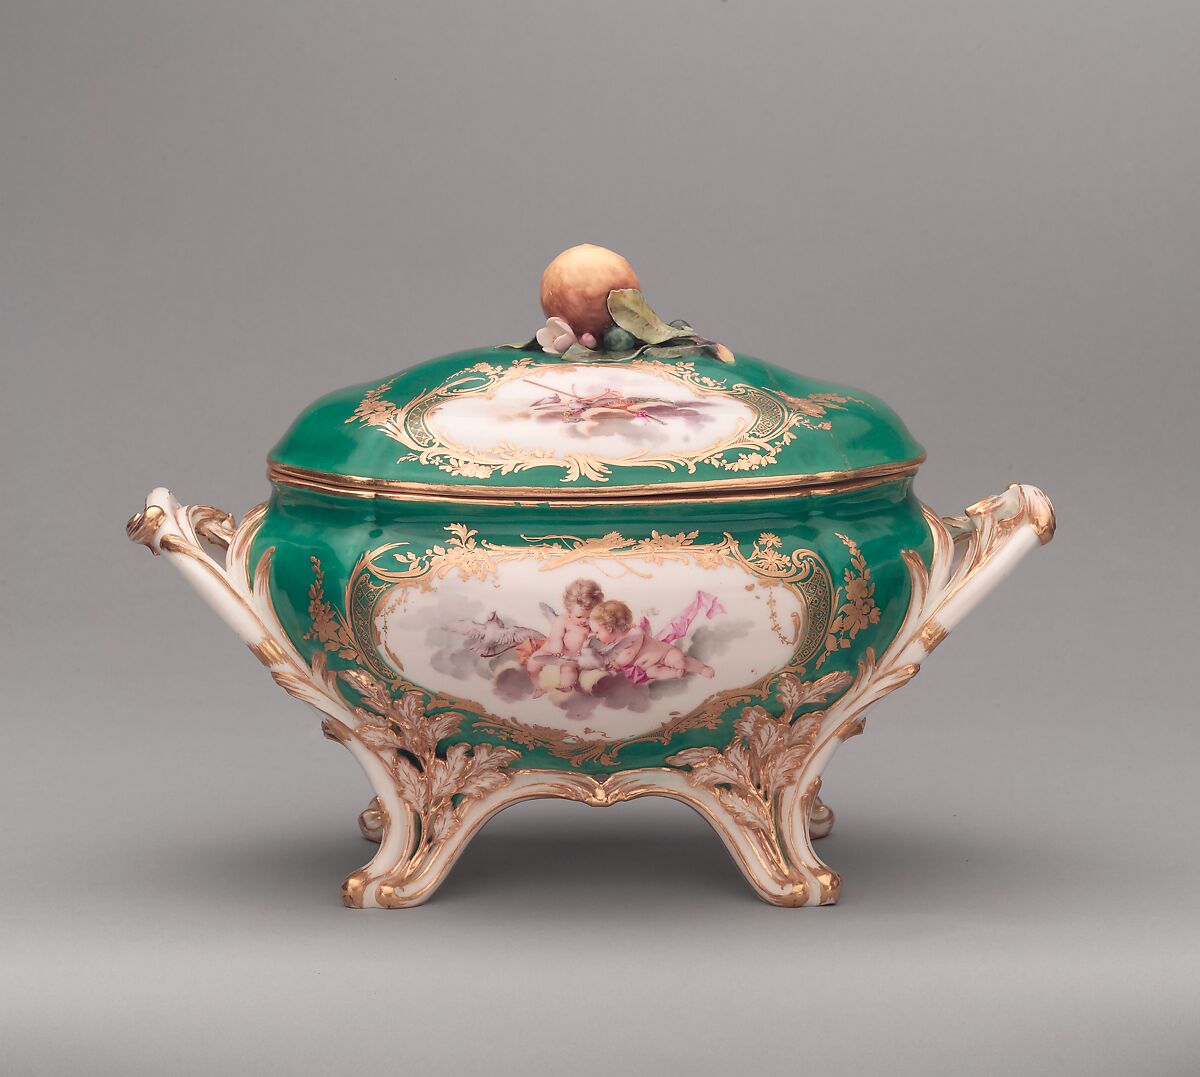 Tureen with cover (terrine du roi), Vincennes Manufactory  French, Soft-paste porcelain, French, Vincennes